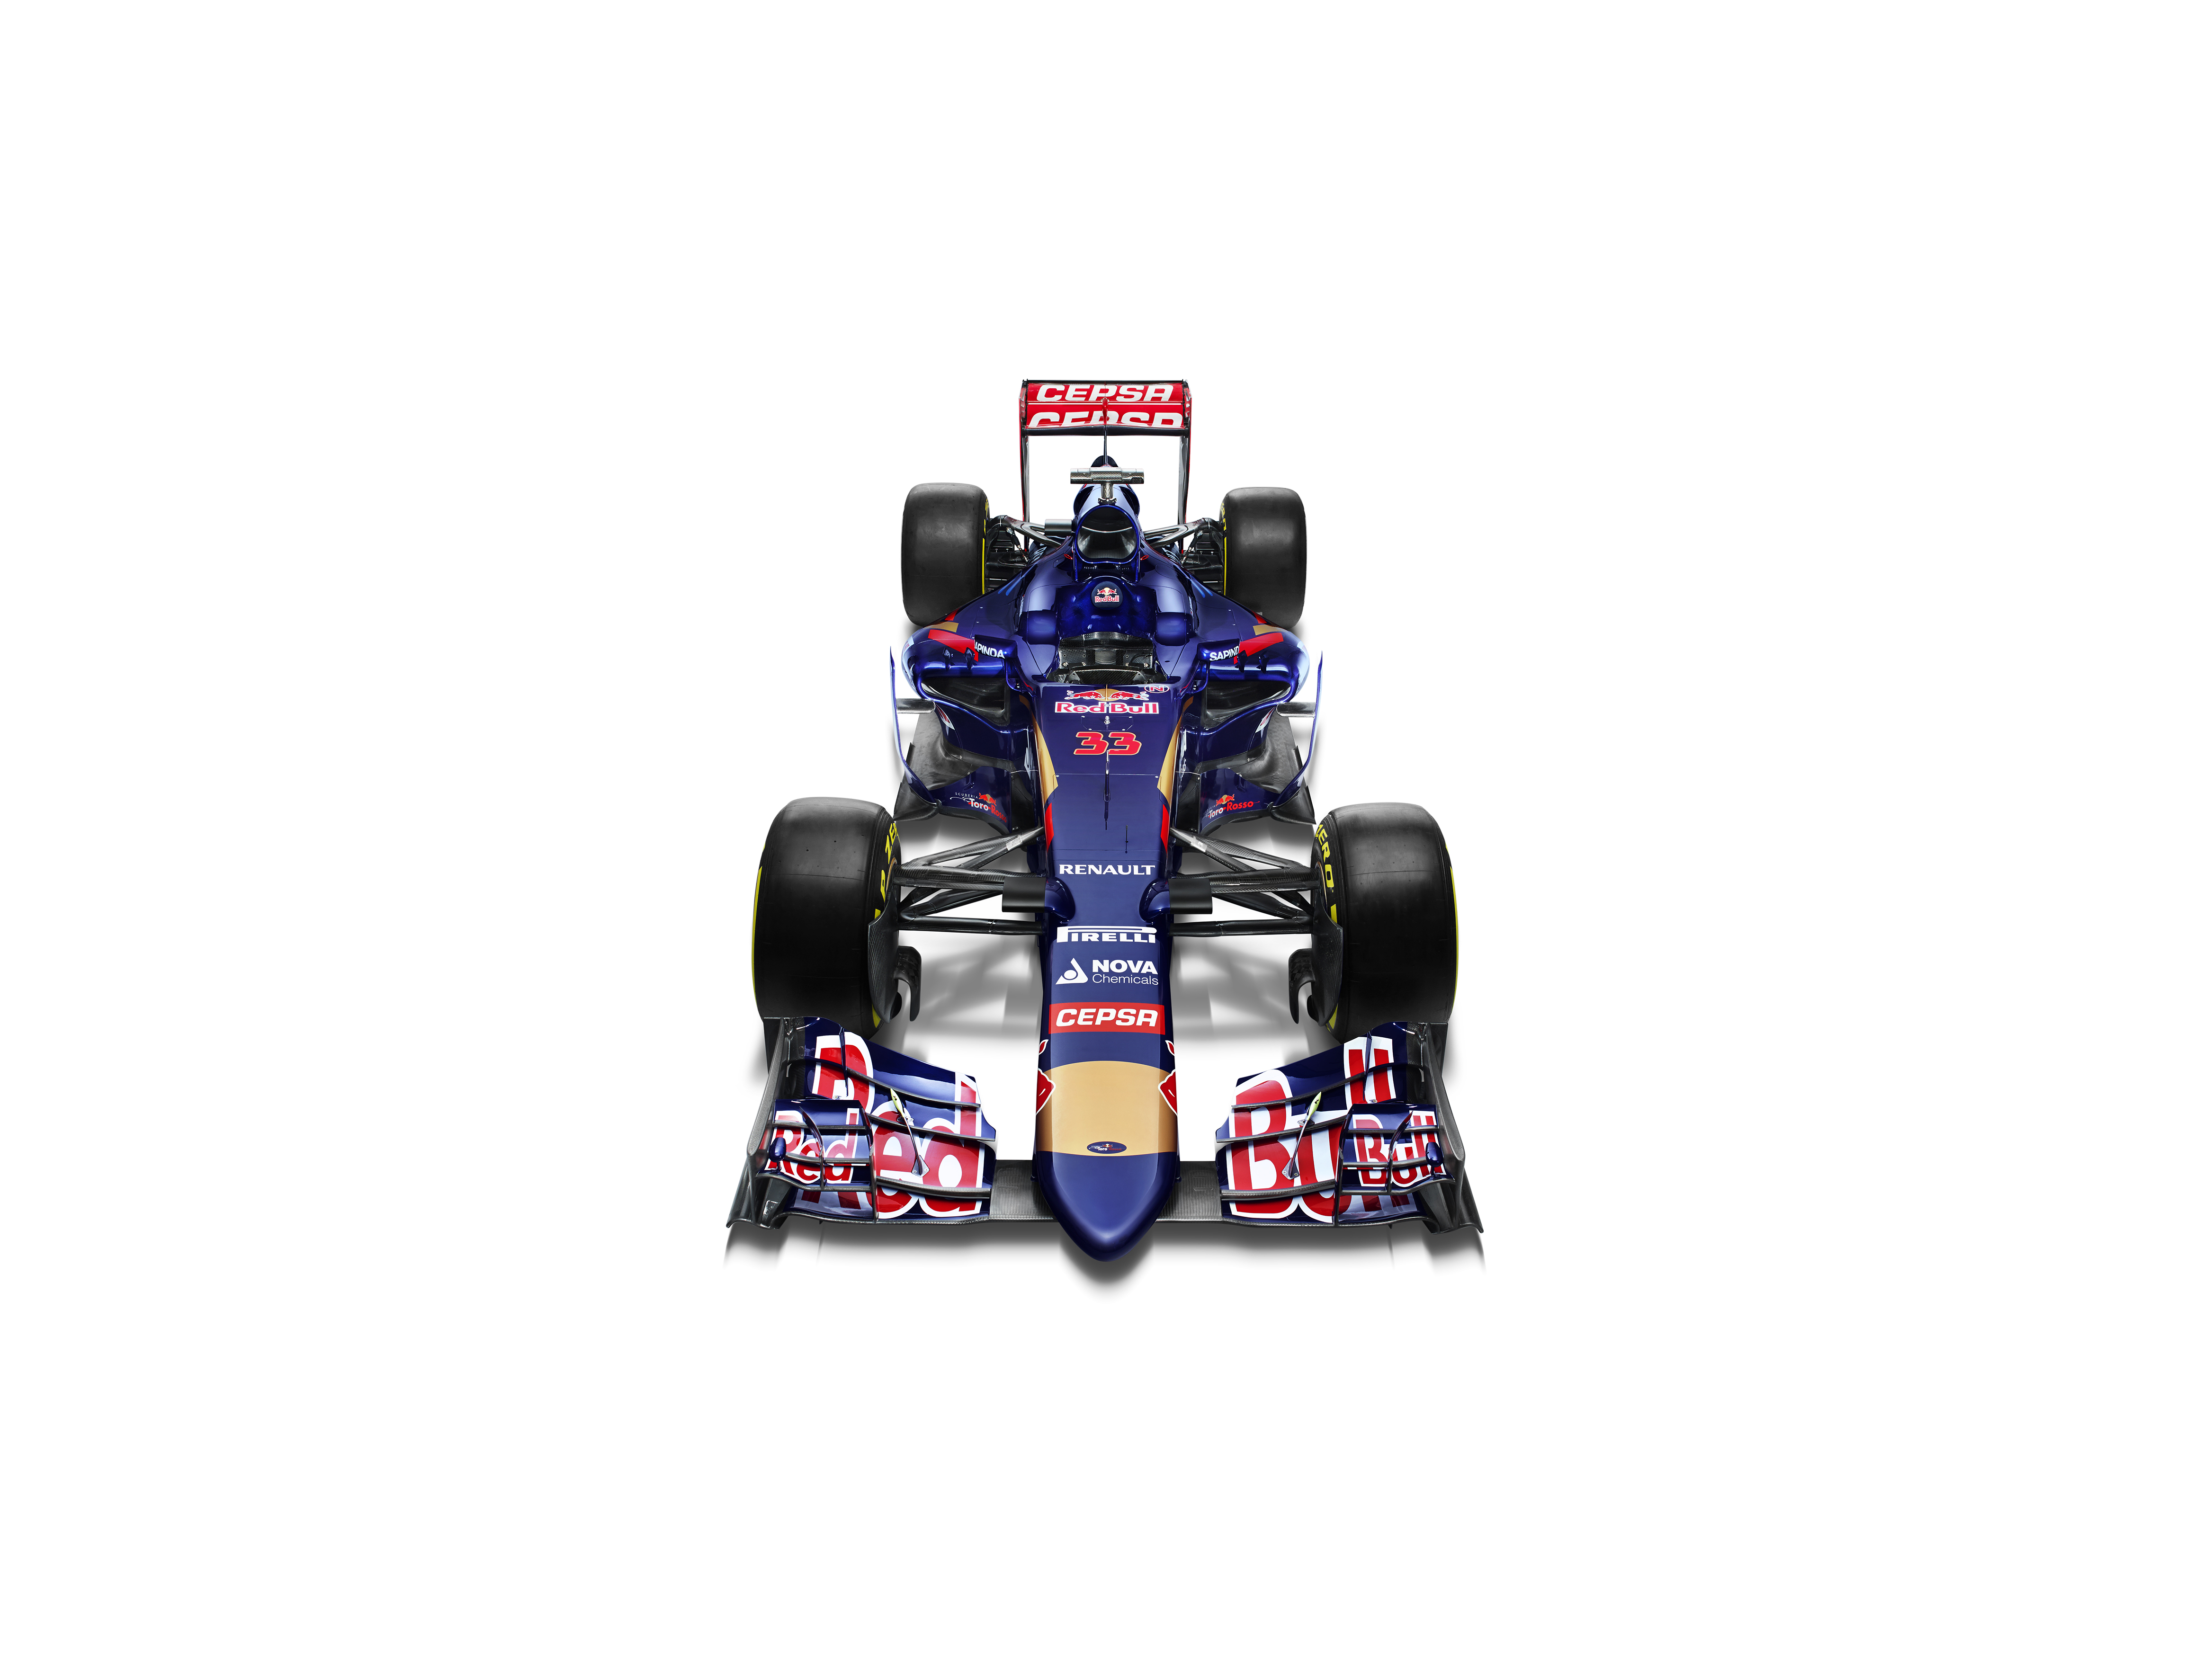 Toro Rosso STR10 Renault - Page 2